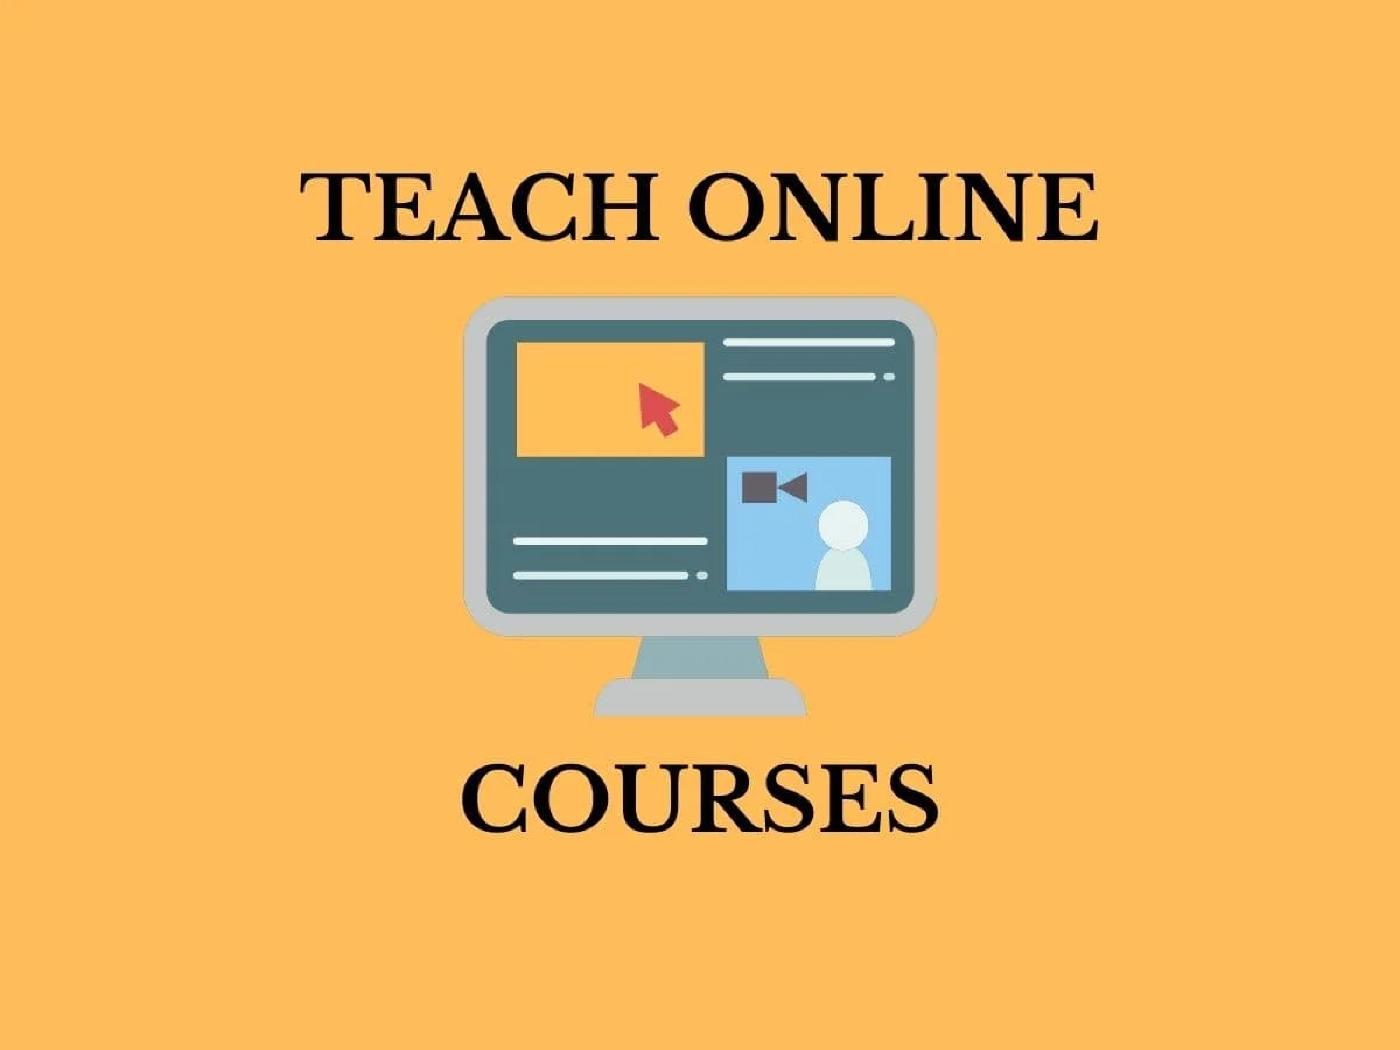 How to Earn Teaching Online Courses